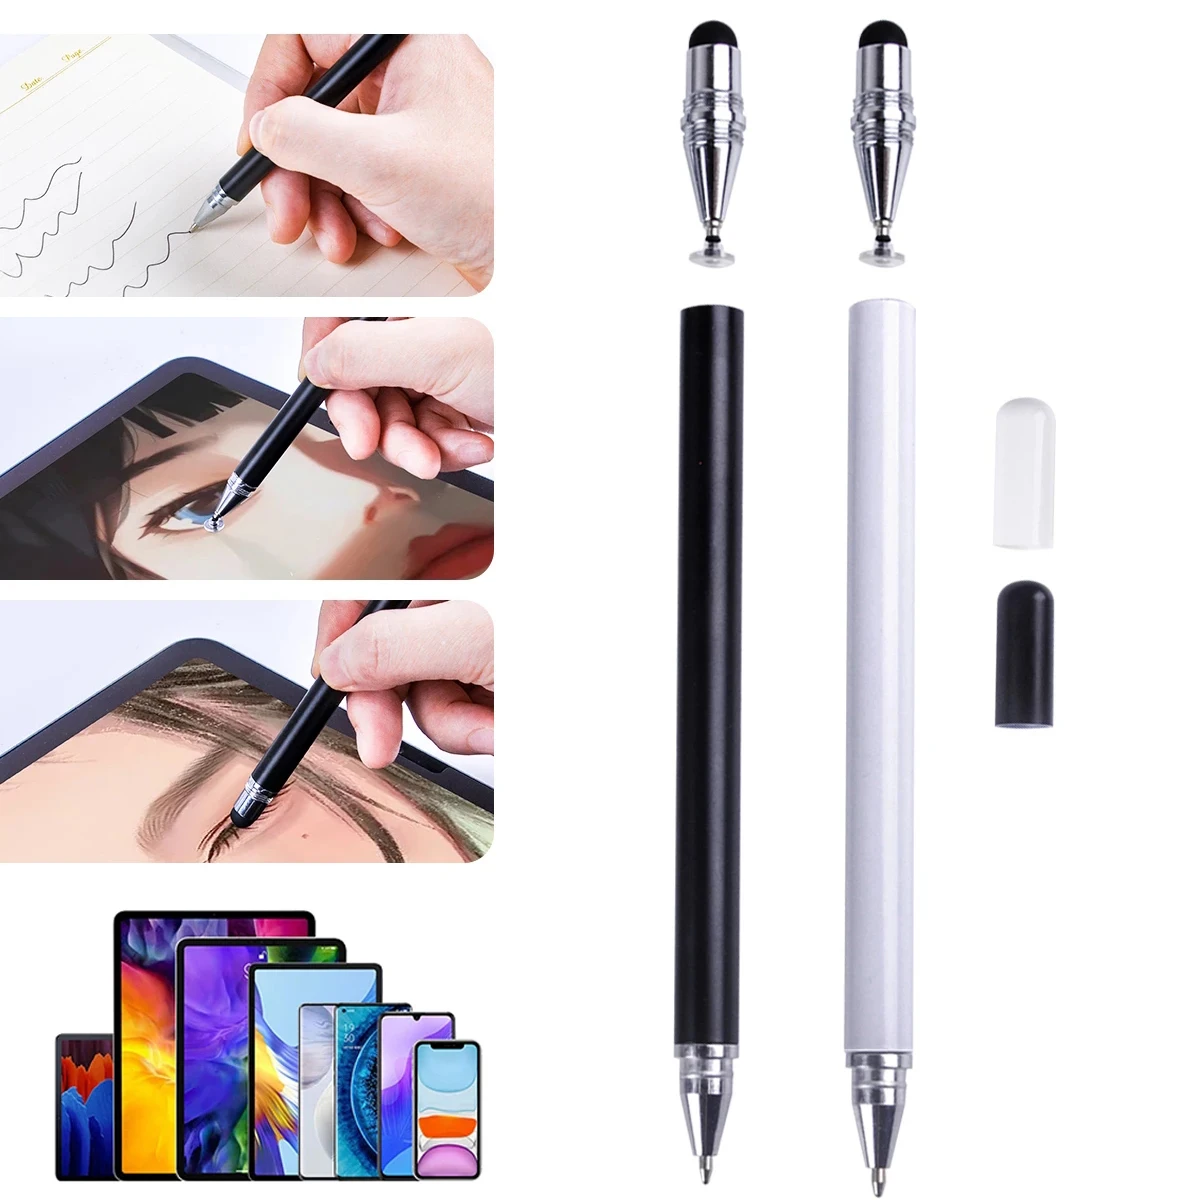 

3 In 1 Multifunction Touchscreen Pen For IOS Ipad Android Phones Tablet Universal Drawing Writing Capacitive Stylus Pencil